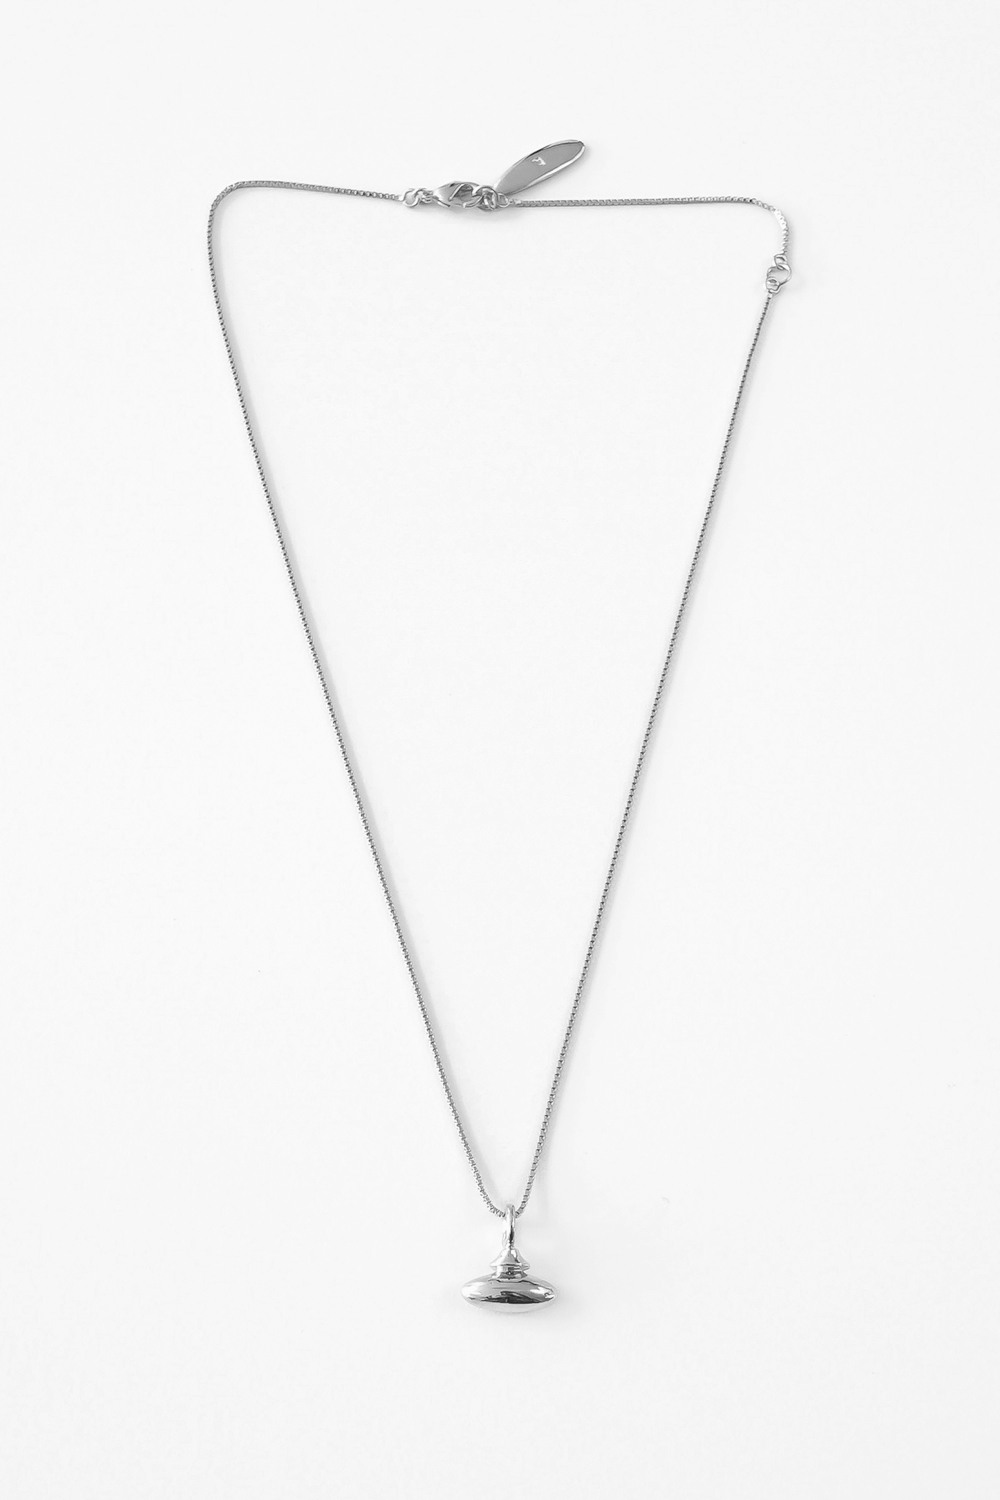 VS_ROUNDED CAP NECKLACE2